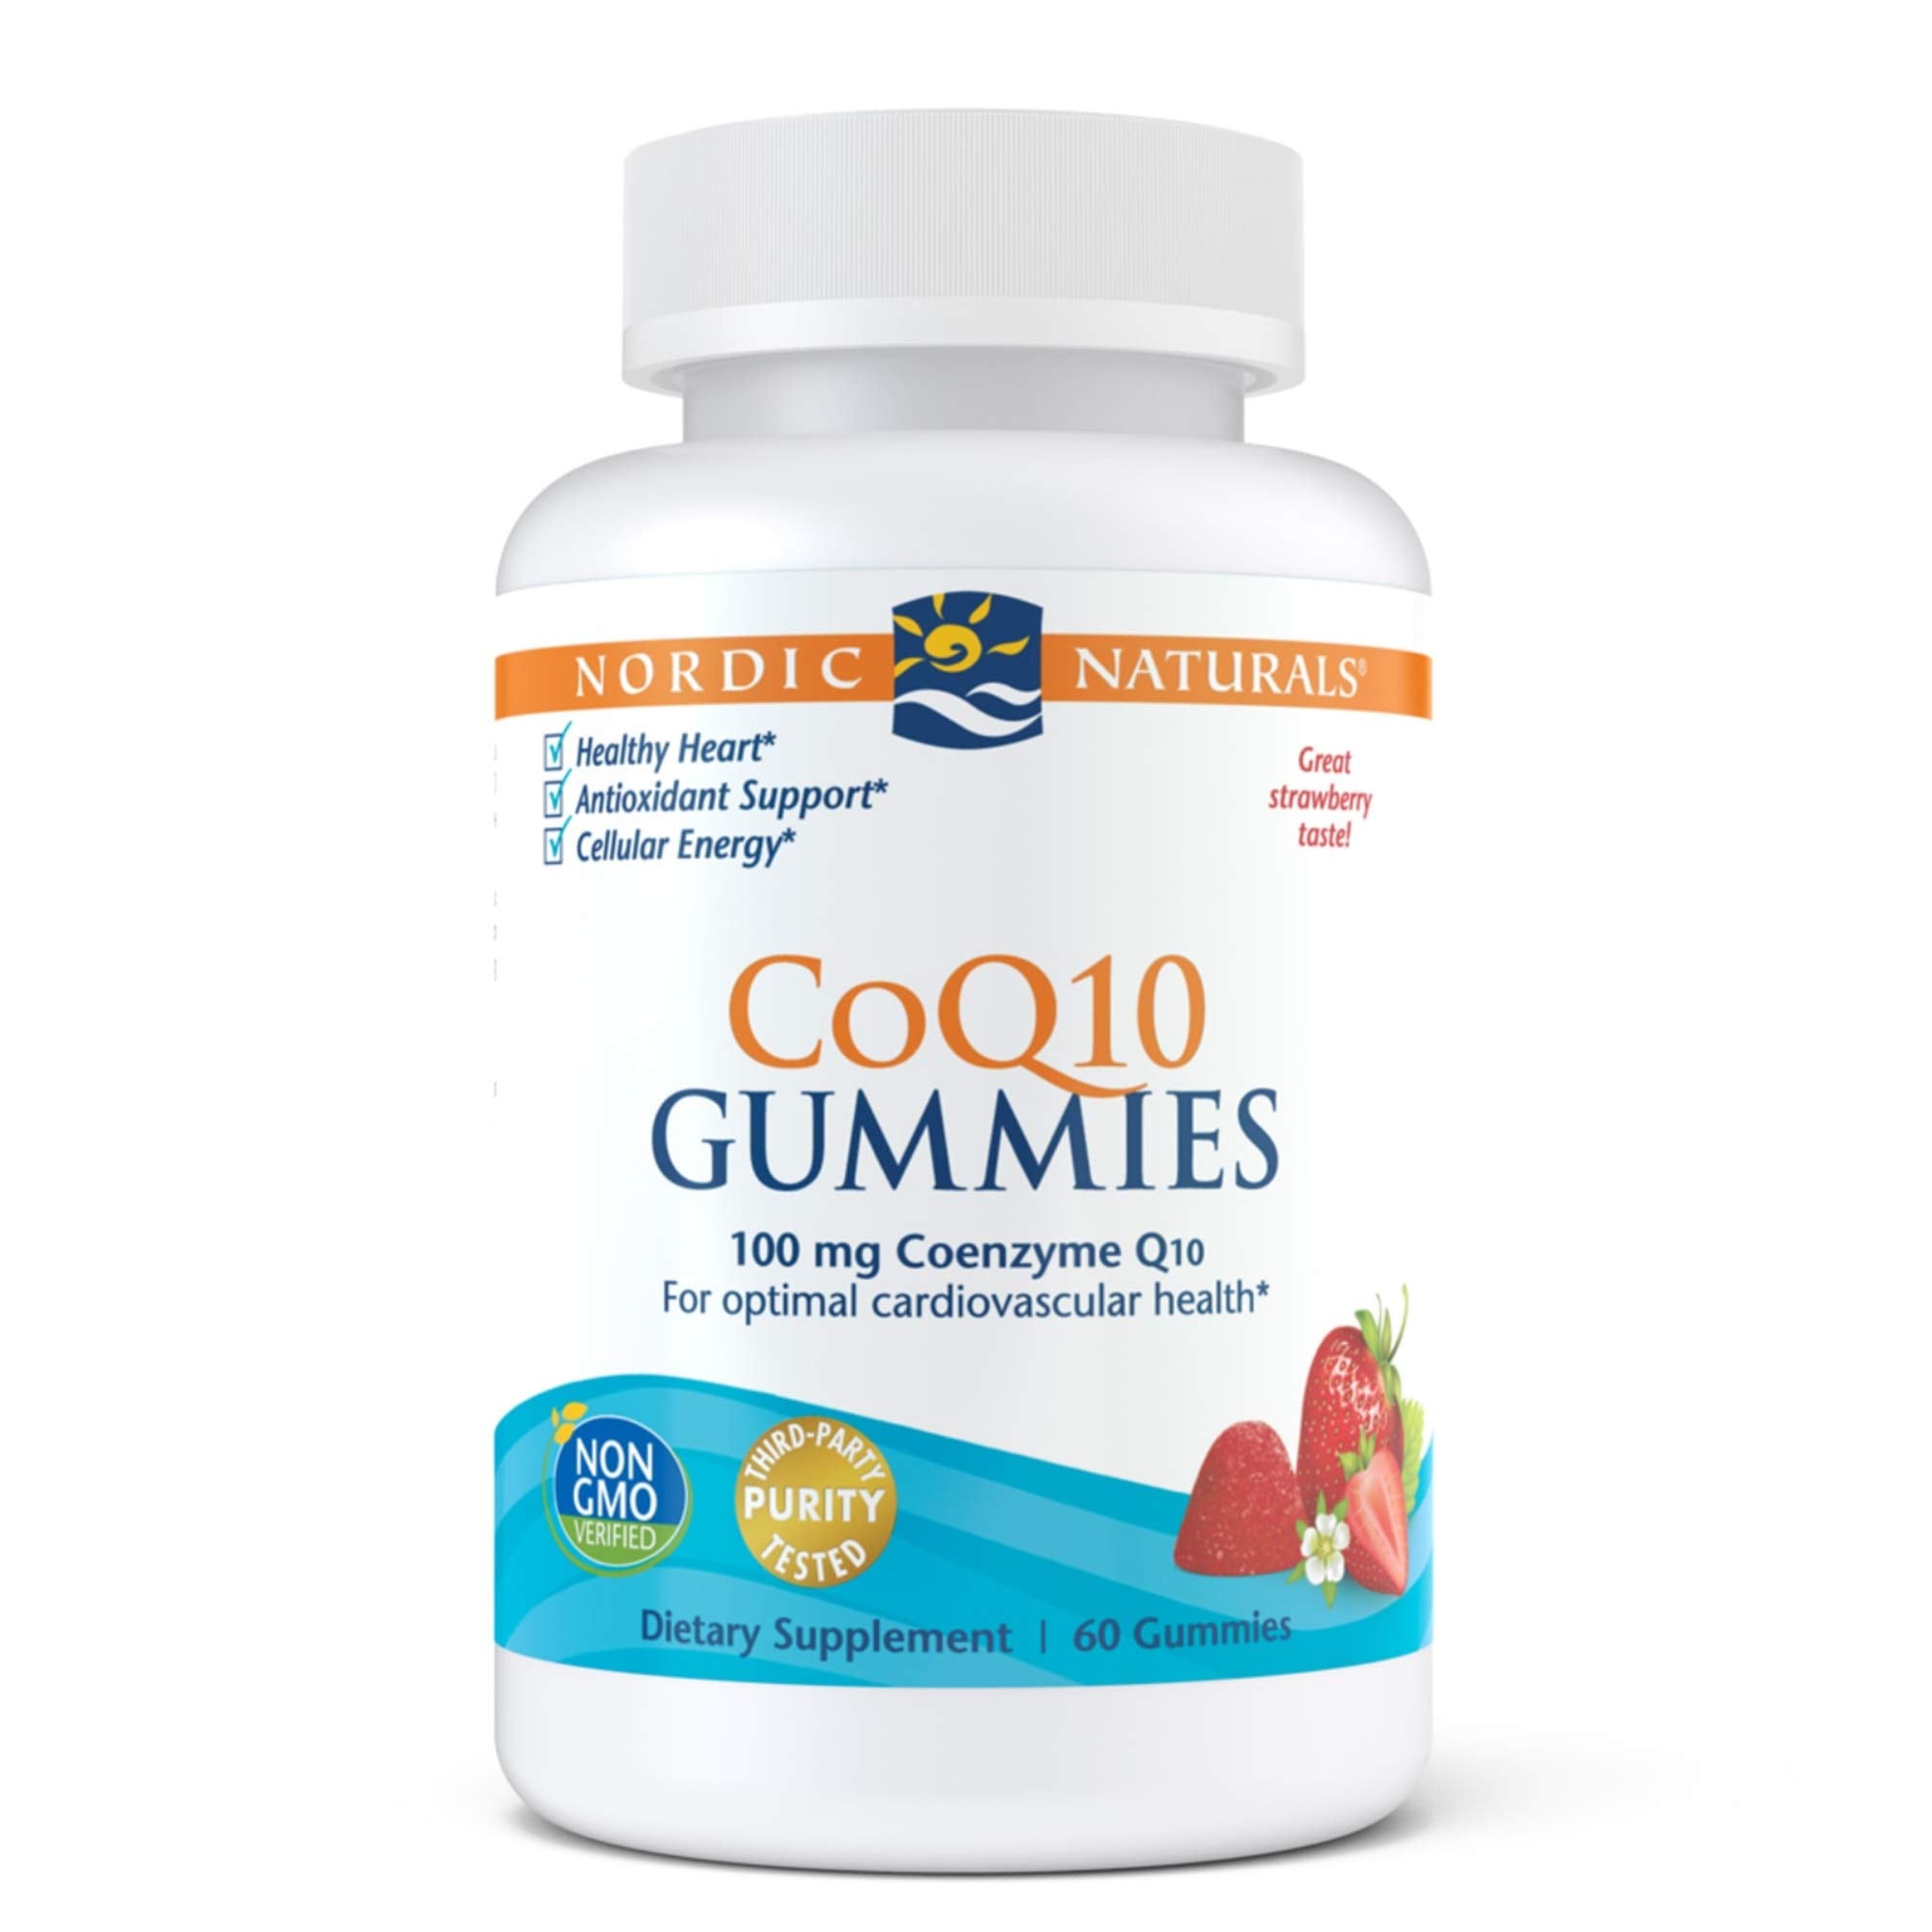 Nordic Naturals CoQ10 Strawberry Gummies - A Powerful Antioxidant, Gives Cellular Energy By Aiding ATP Production and Helps Support Heart Health, Chewable, 60 Count